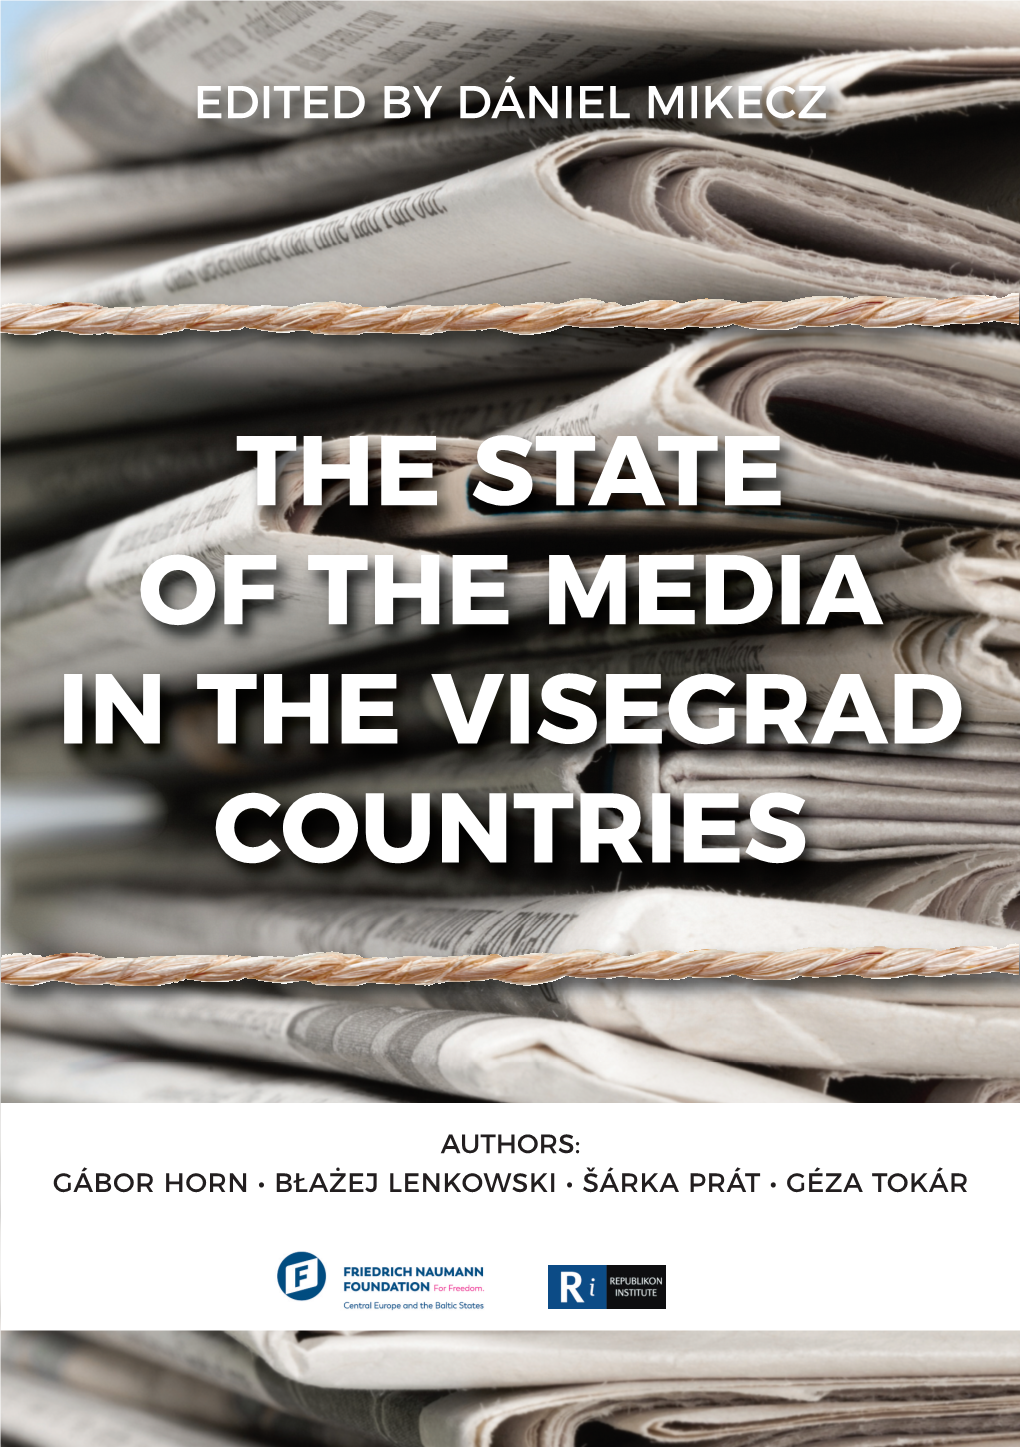 The State of the Media in the Visegrad Countries